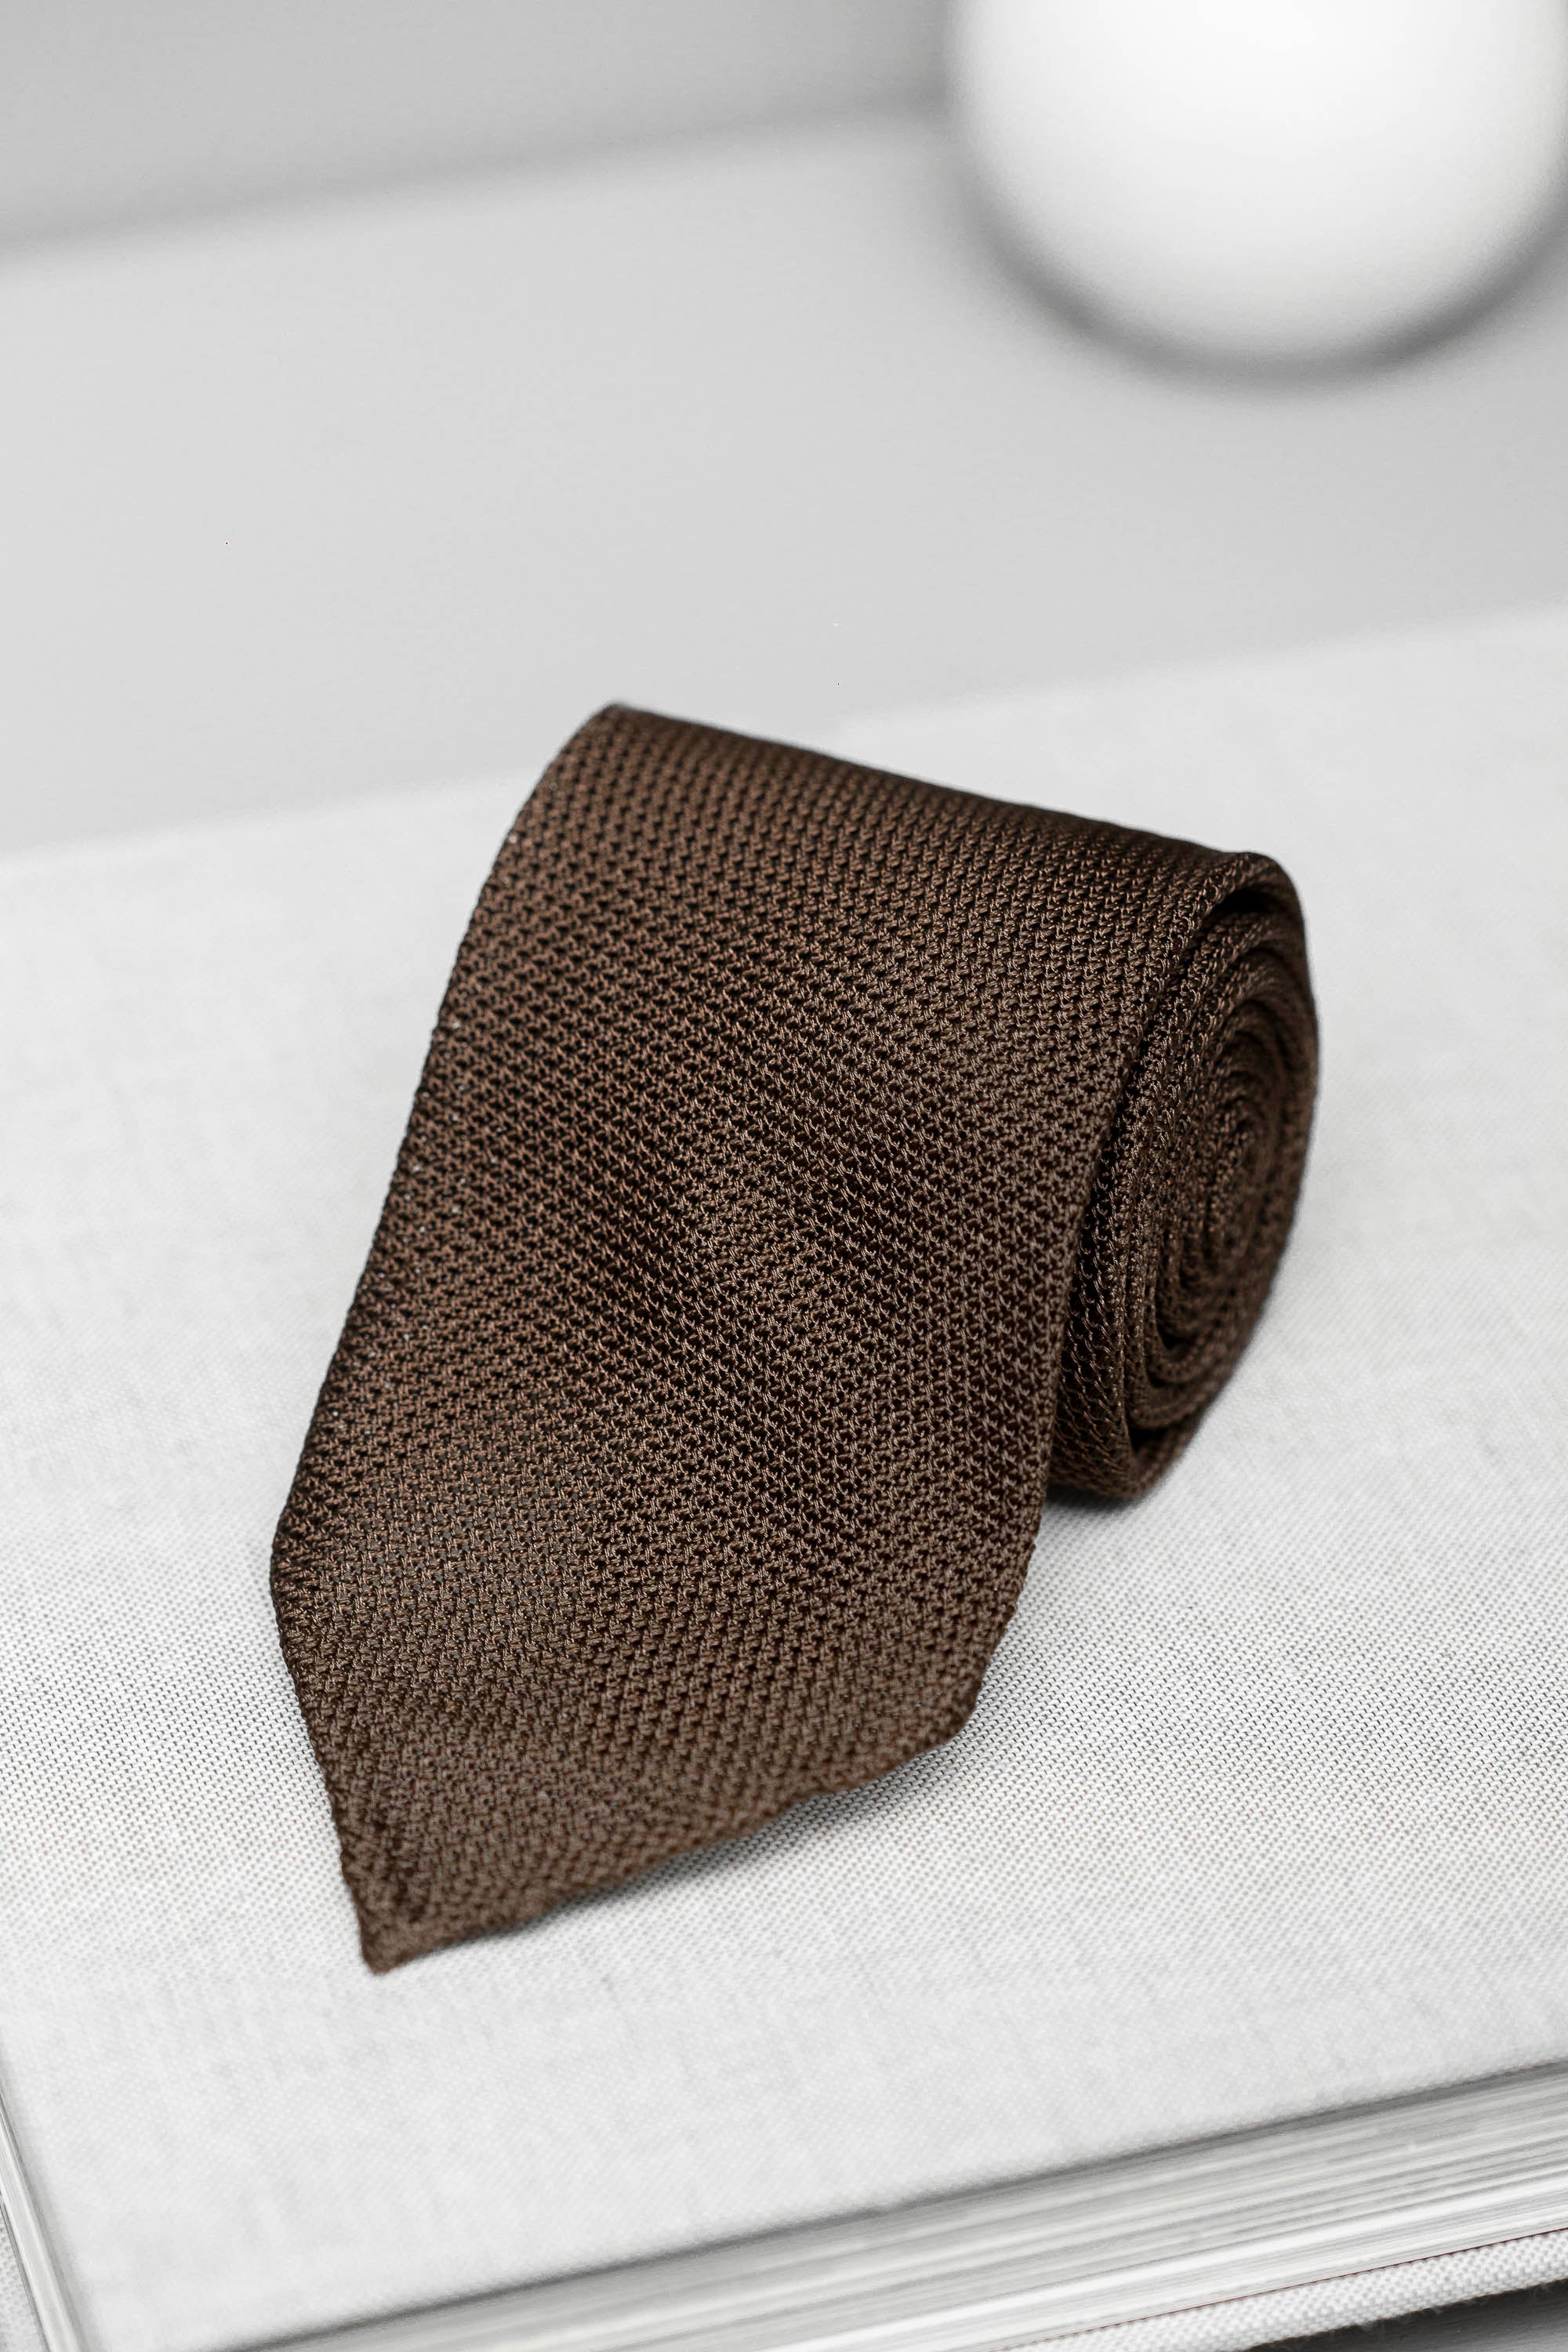 Brown grenadine silk tie - Hand Made In Italy